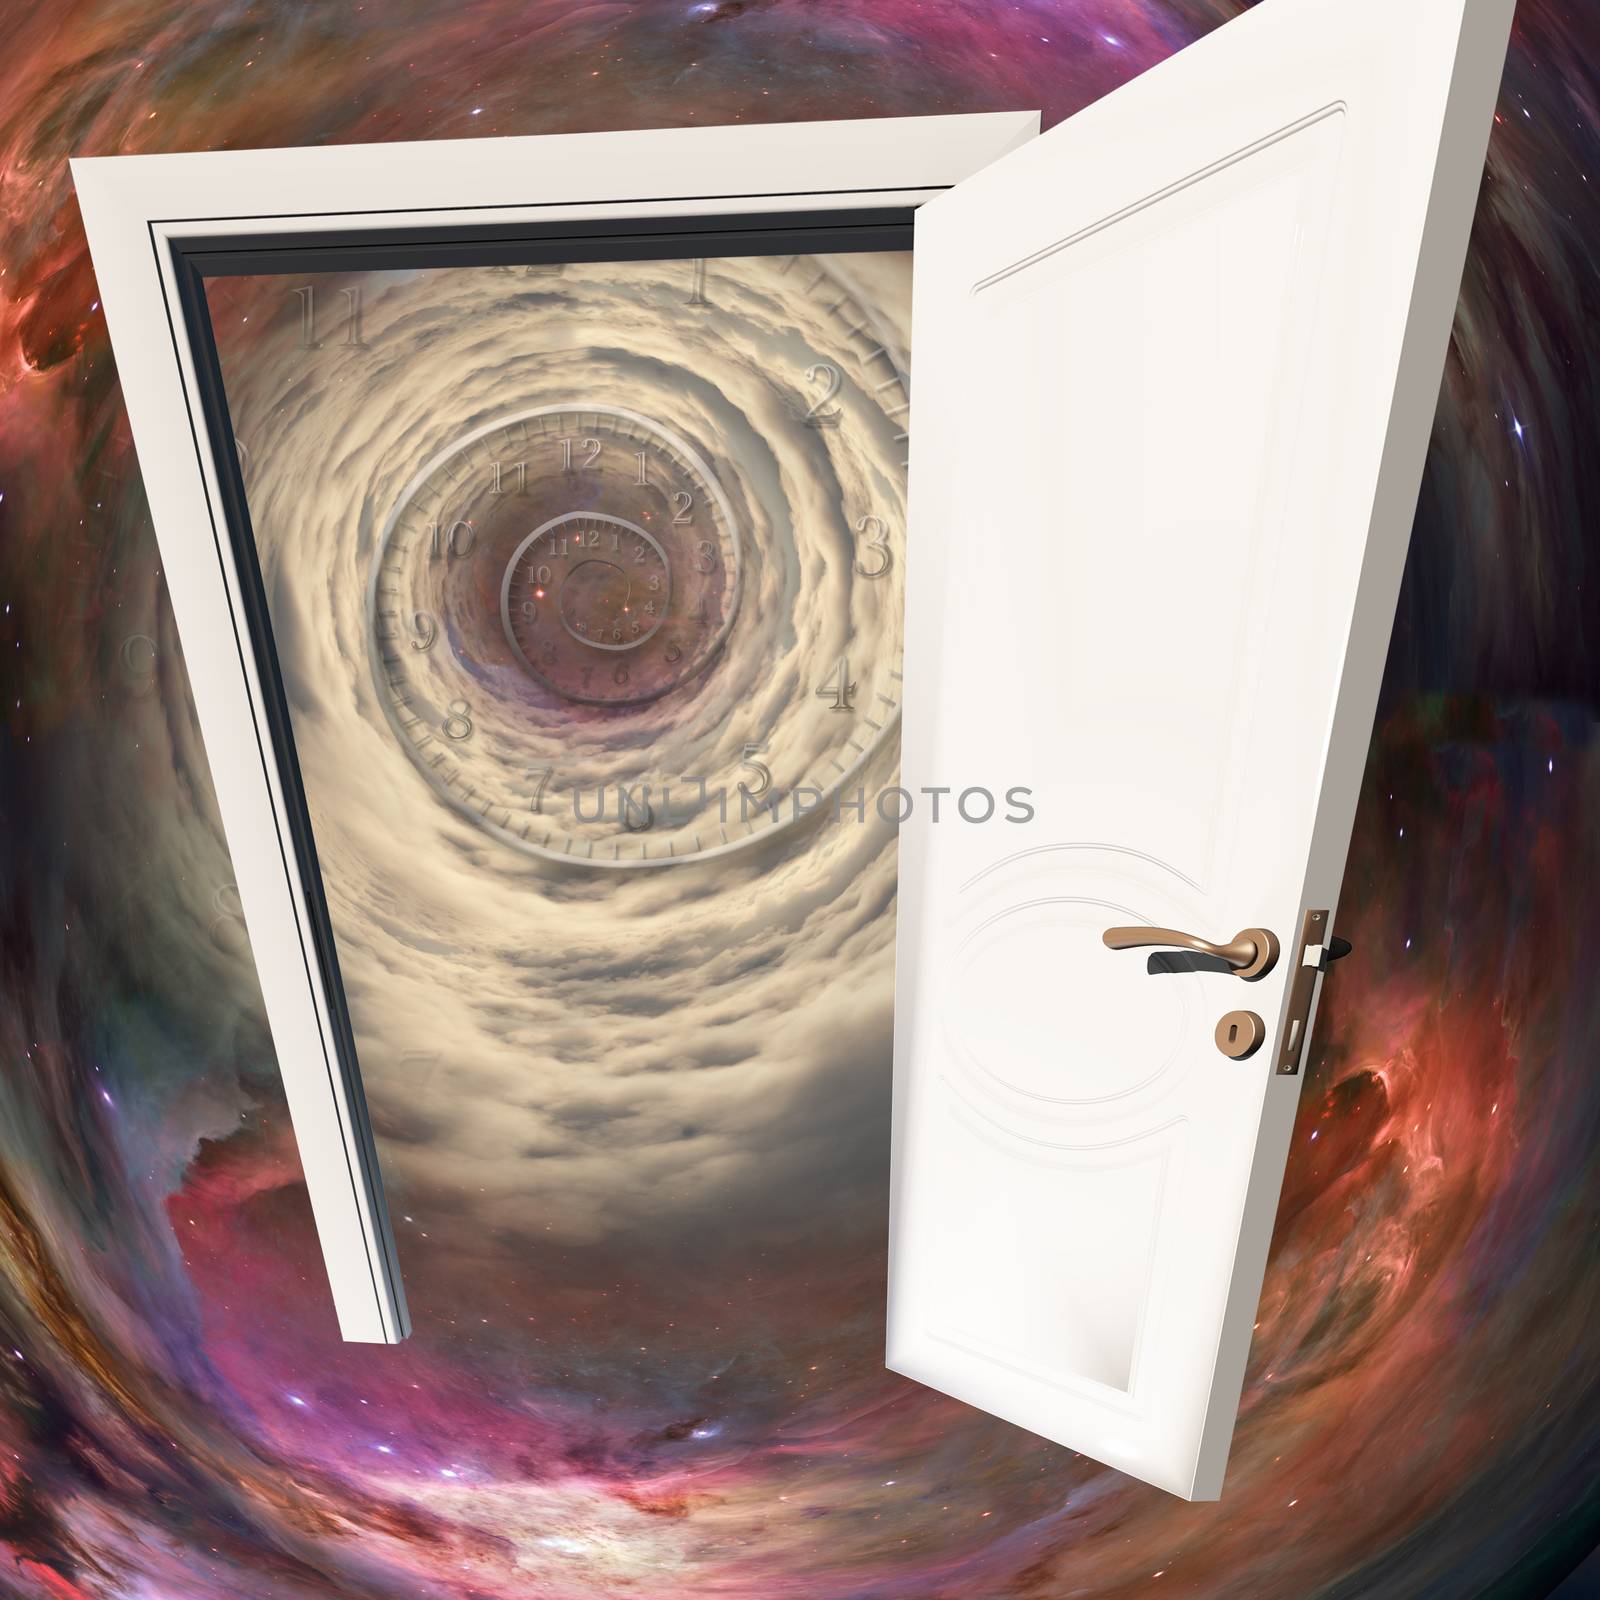 The white door, space tunnel